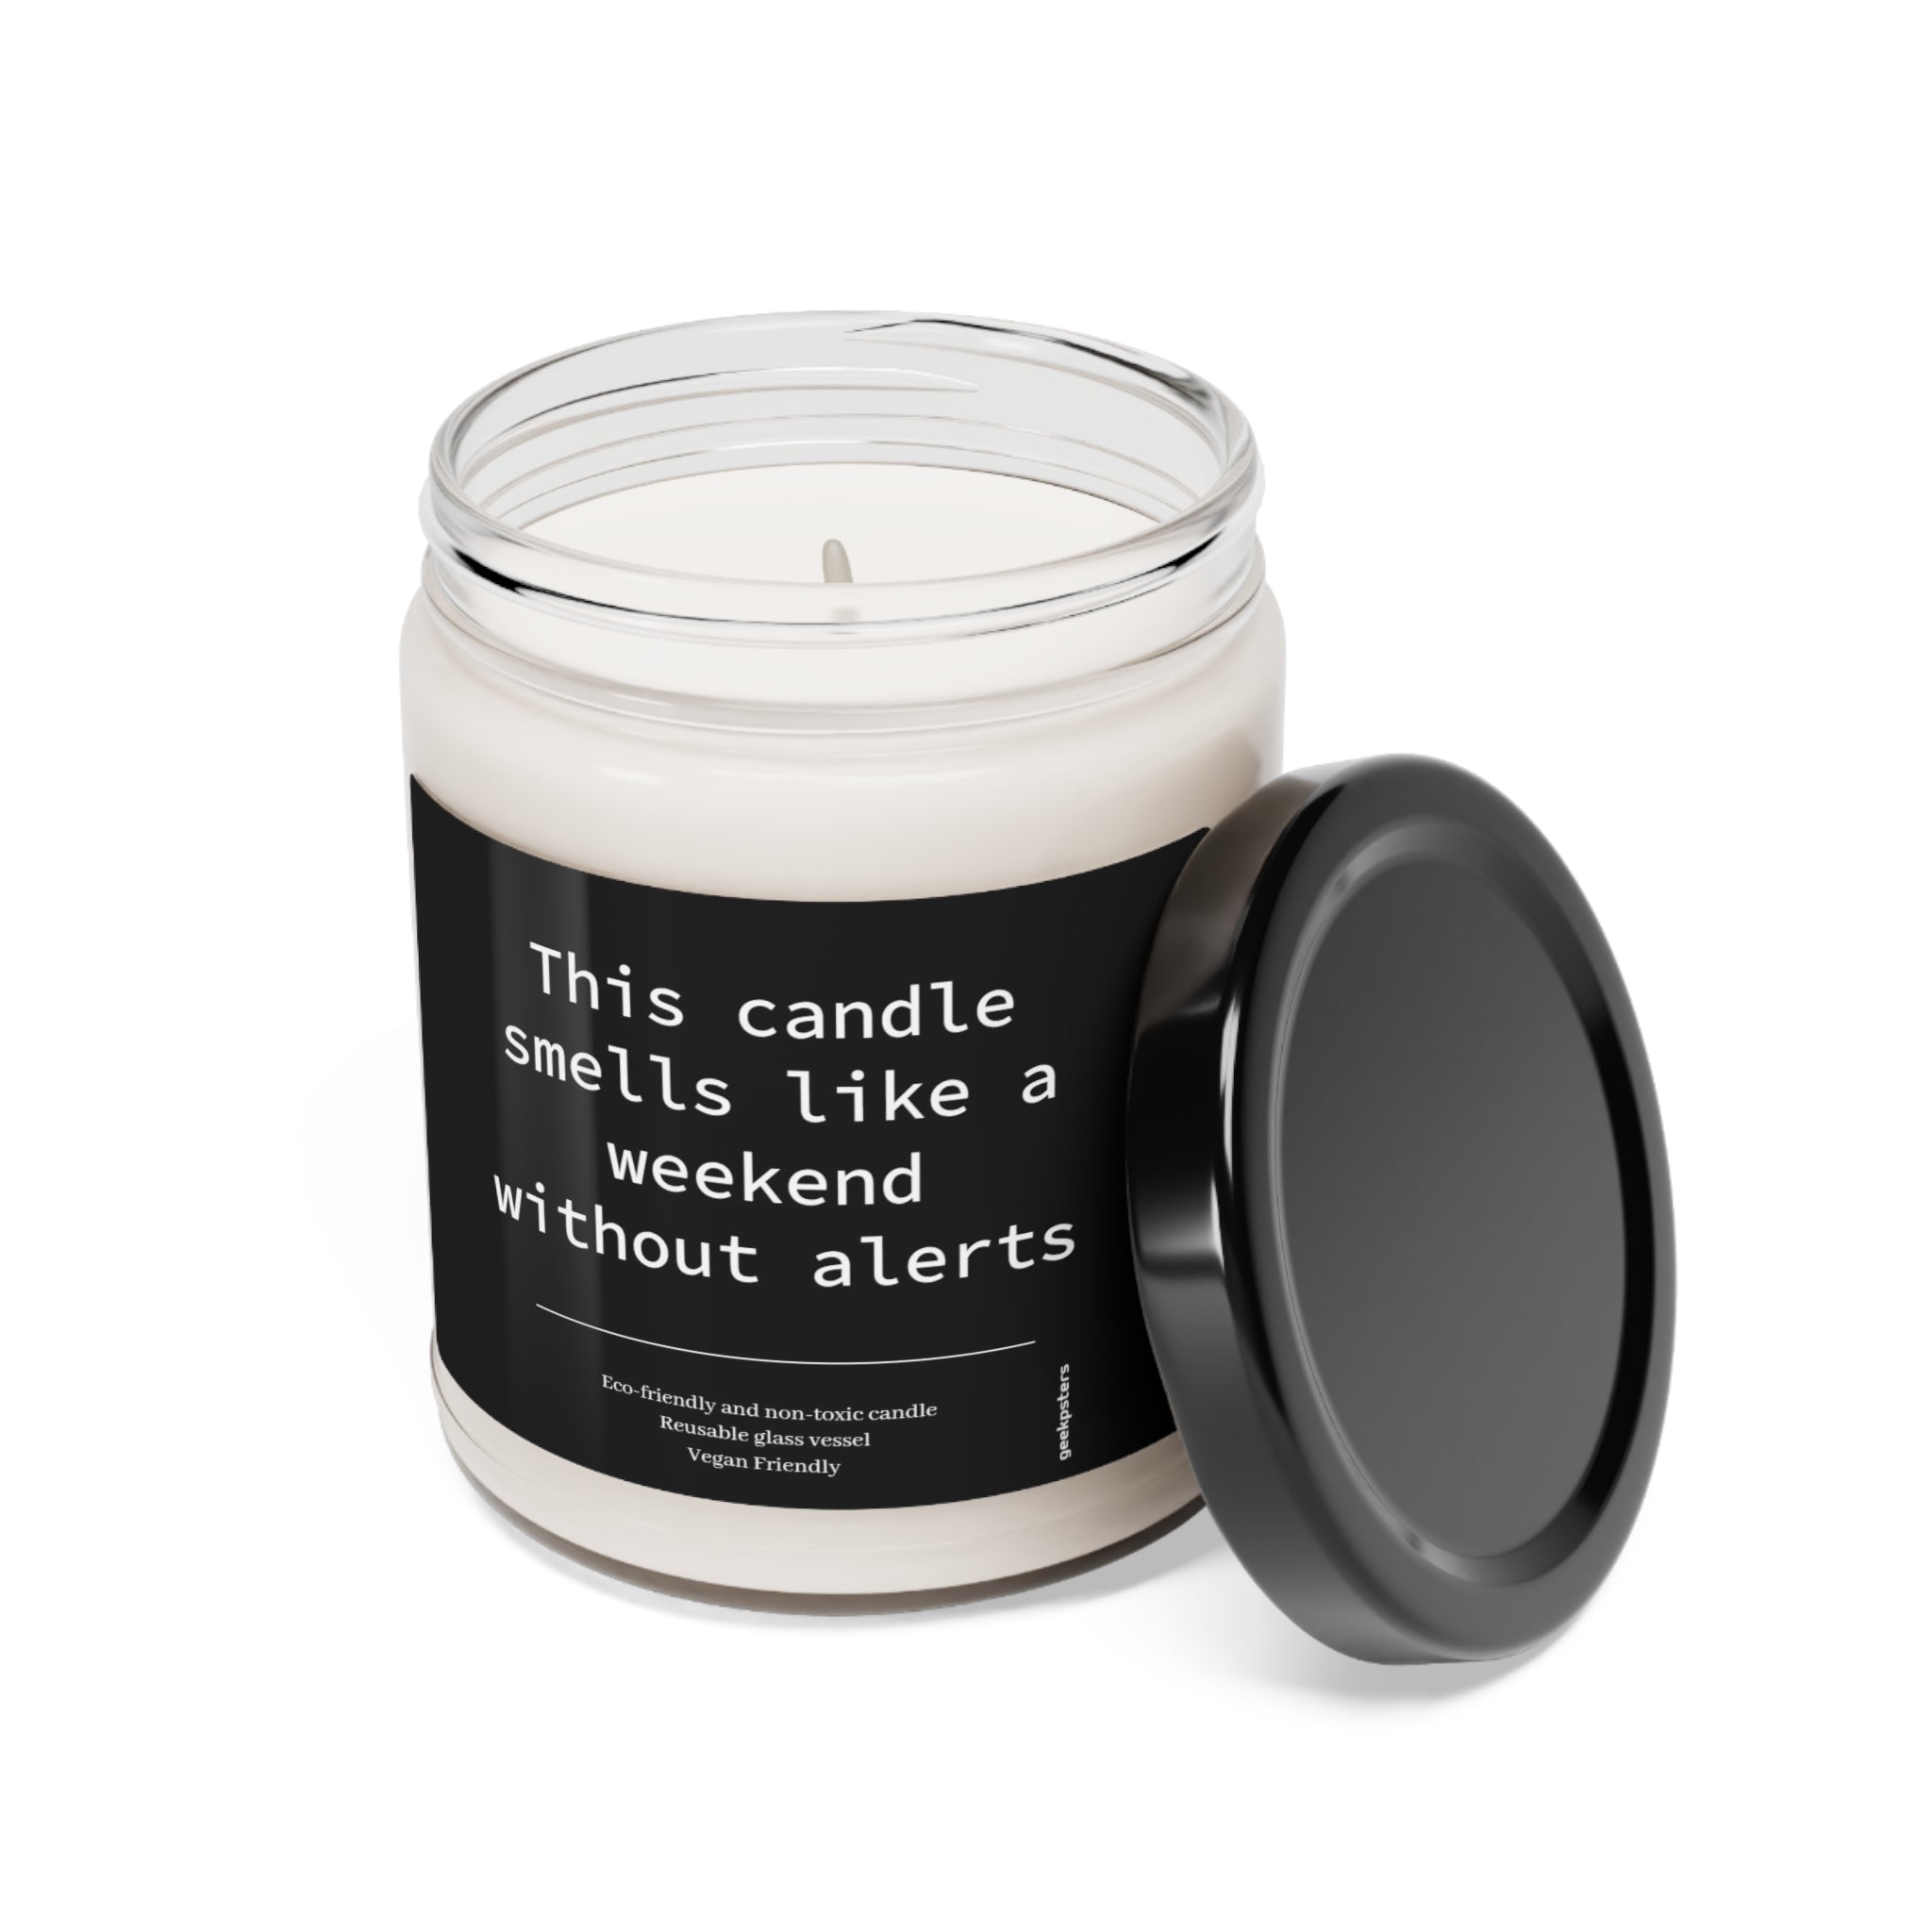 This "This Candle Smells Like a Weekend Without Alerts" scented soy candle, lid off, against a white background, featuring a 100% cotton wick.